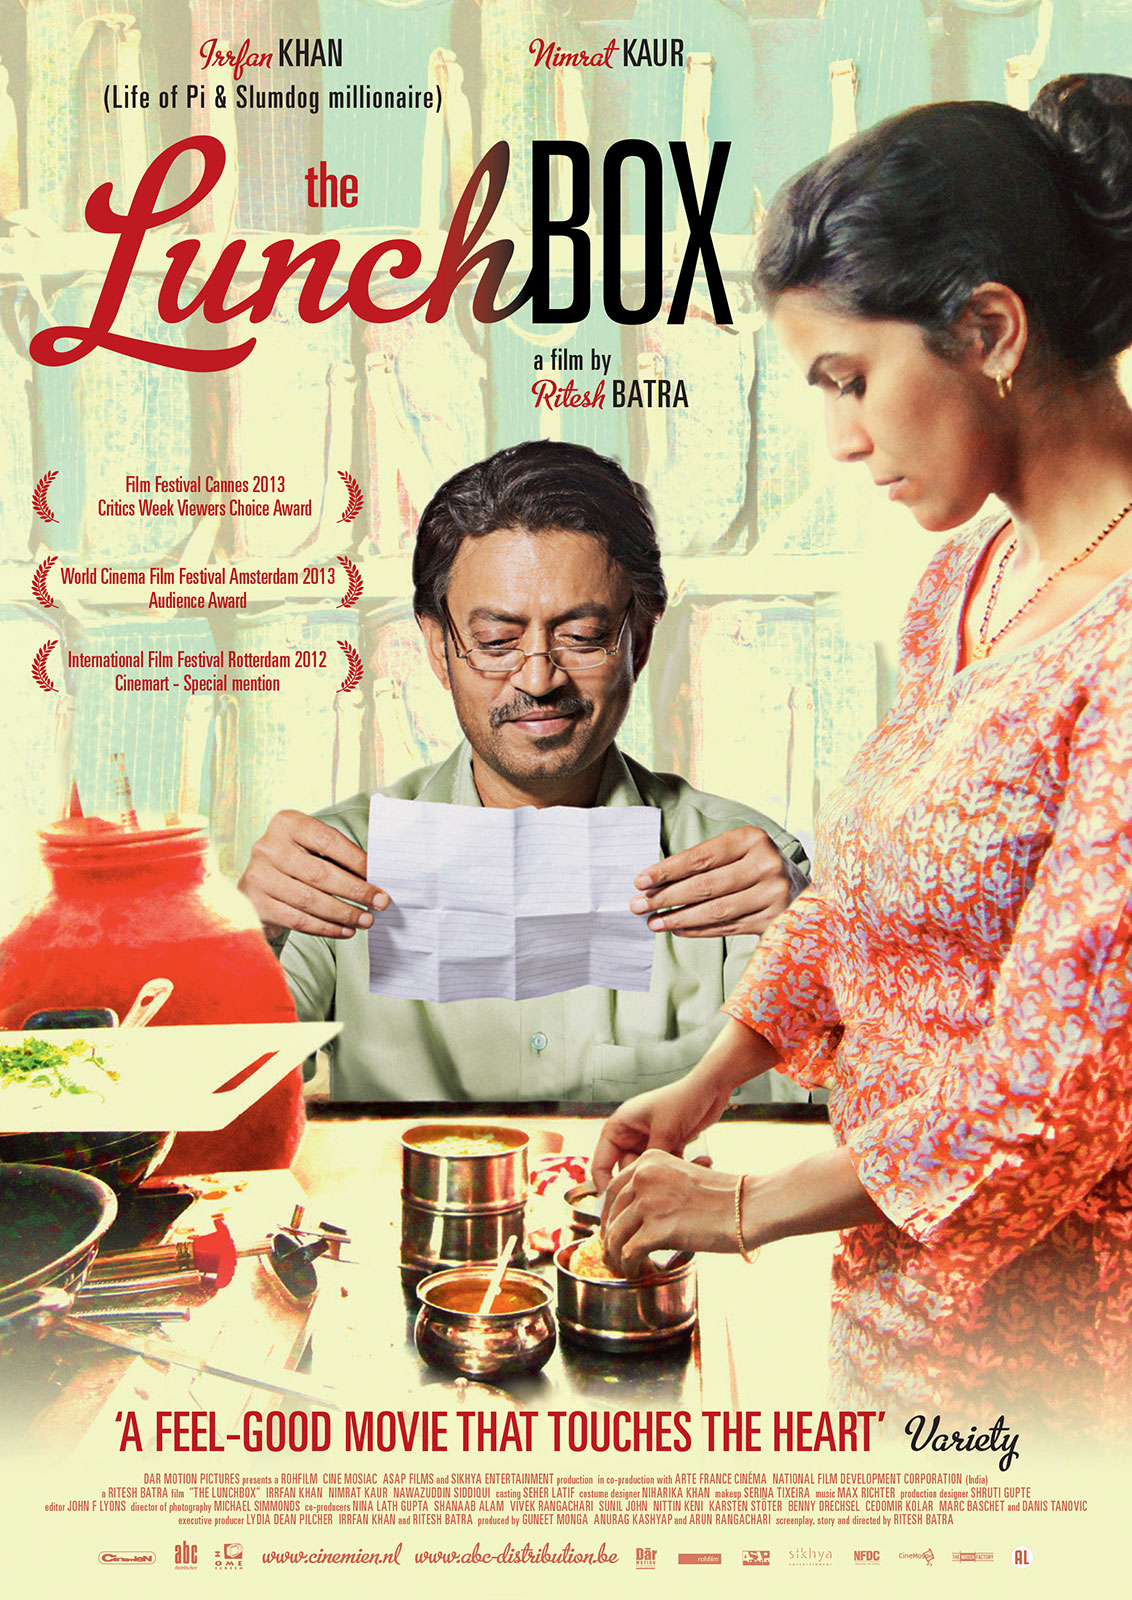 Lunchbox: Charming Romantic Drama With Simple Yet Compelling Premise